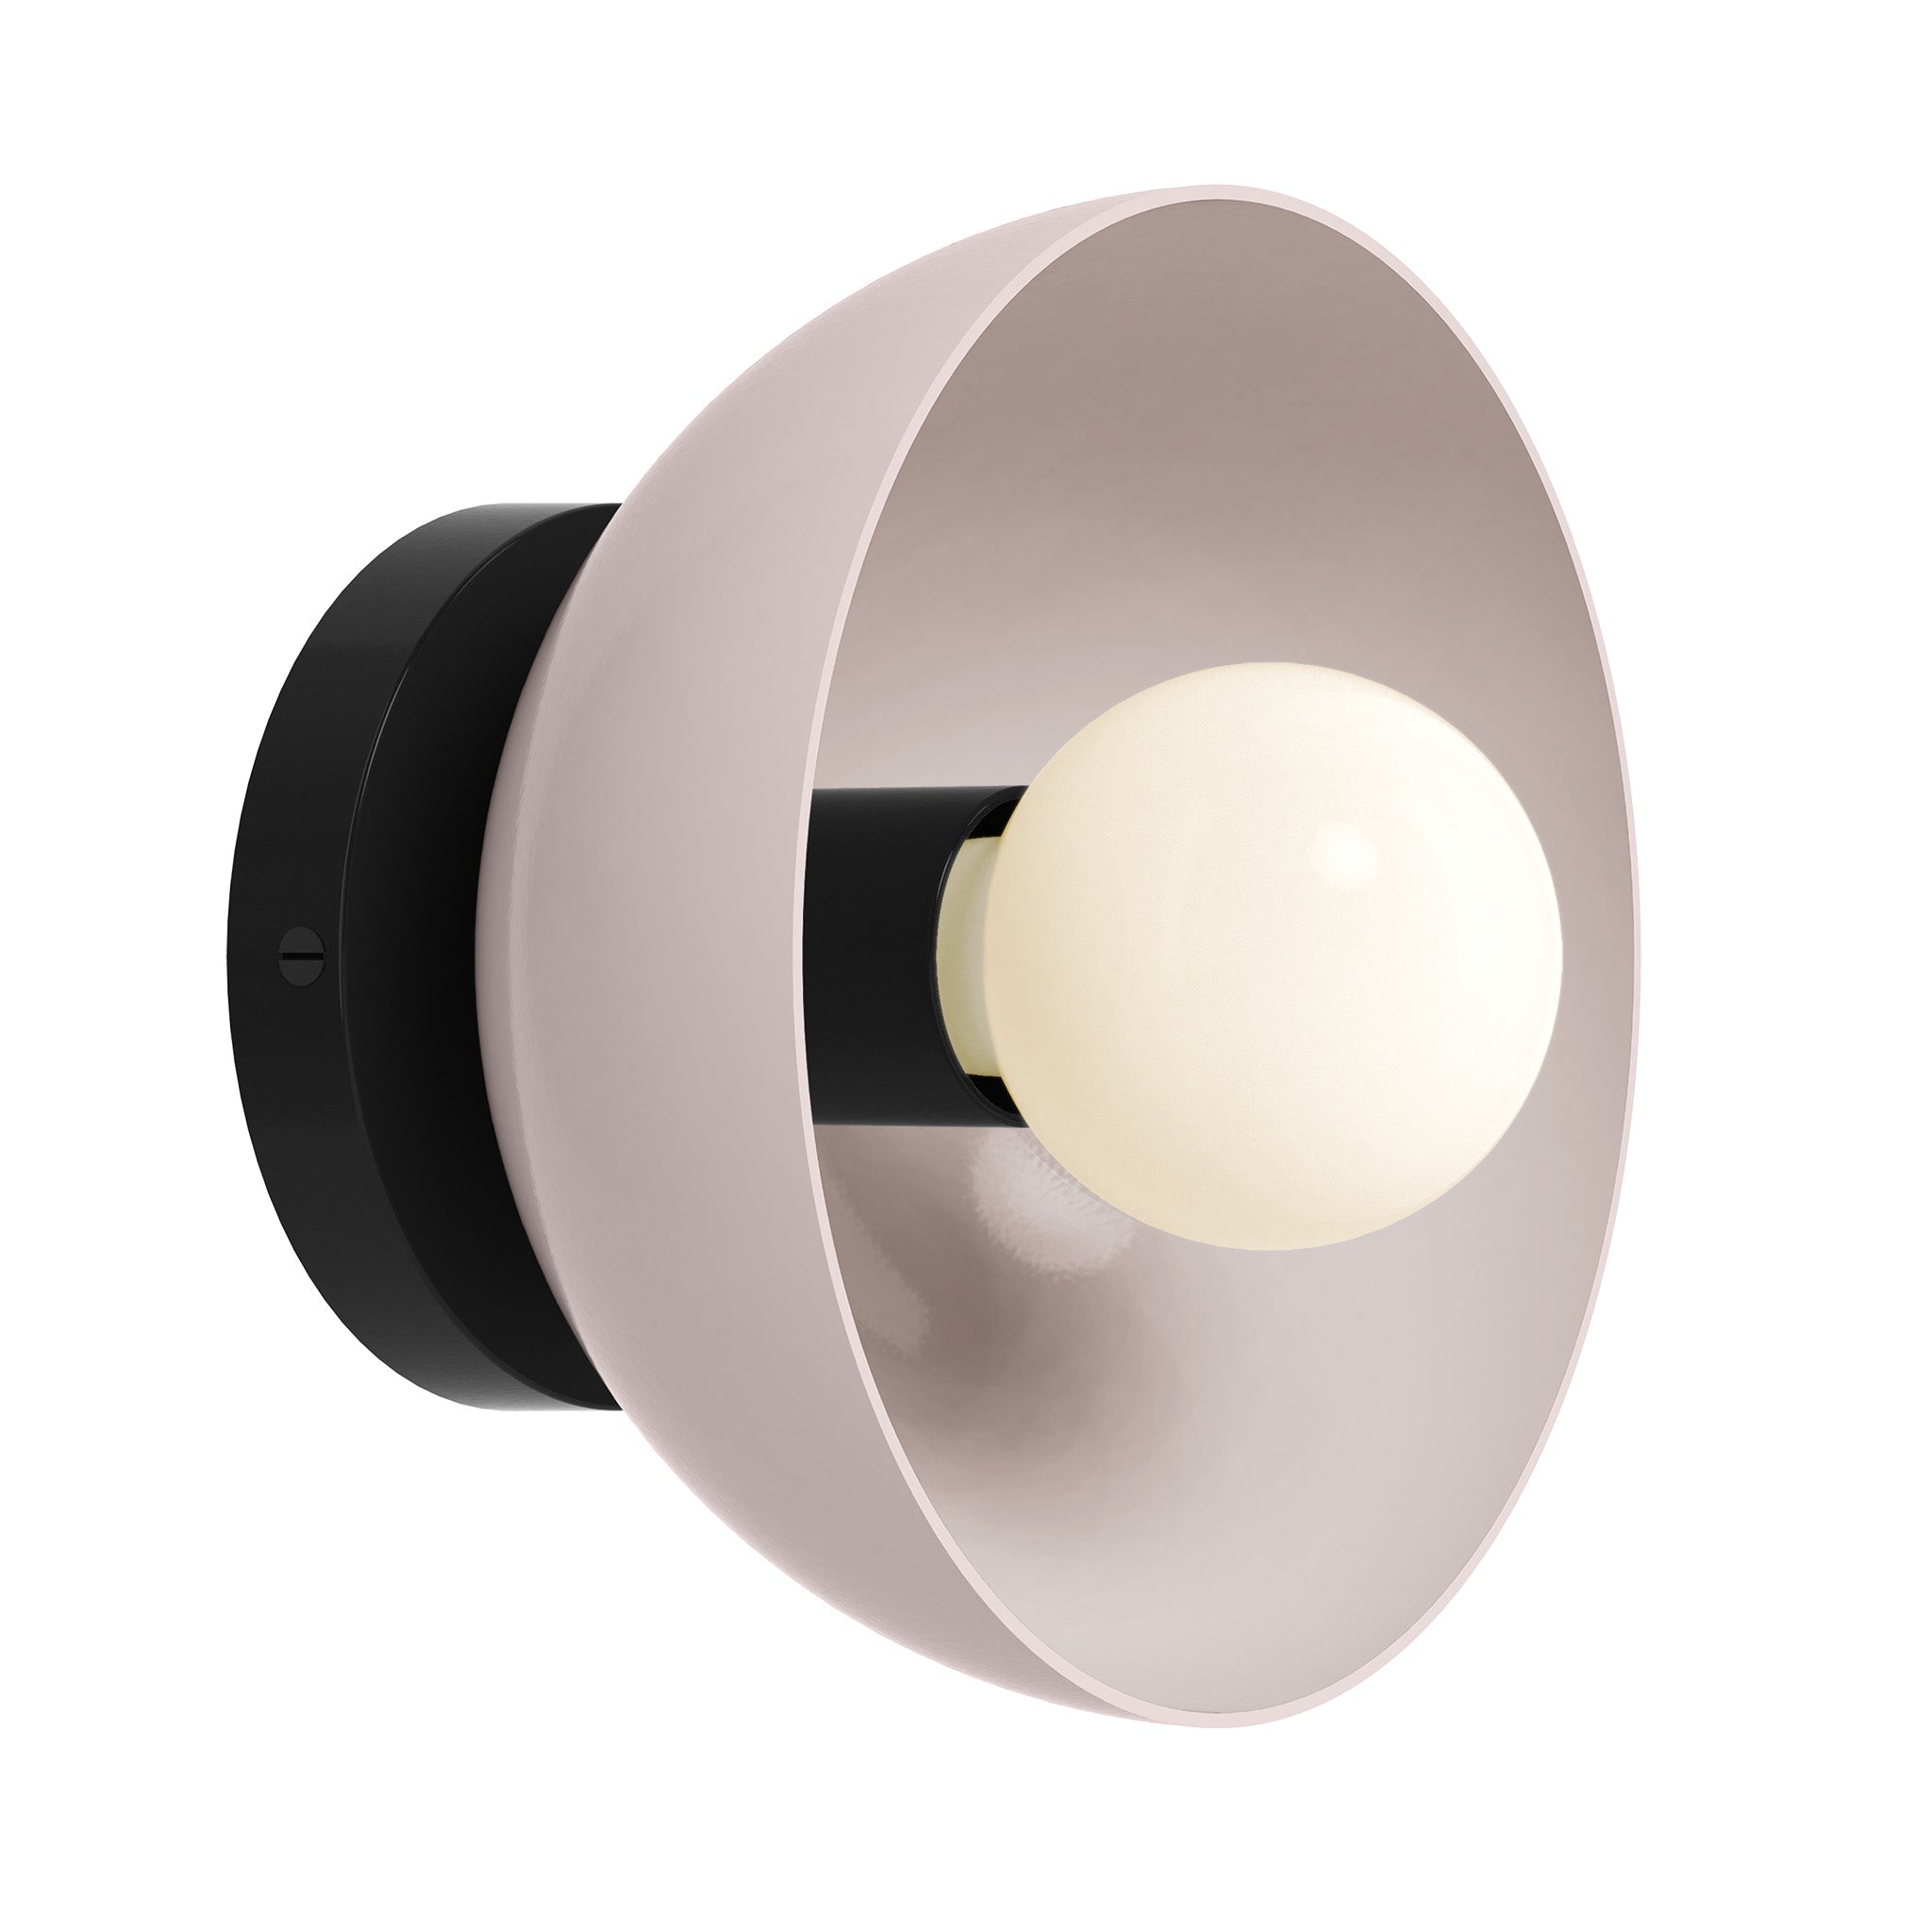 Black and barely color Hemi sconce 8" Dutton Brown lighting